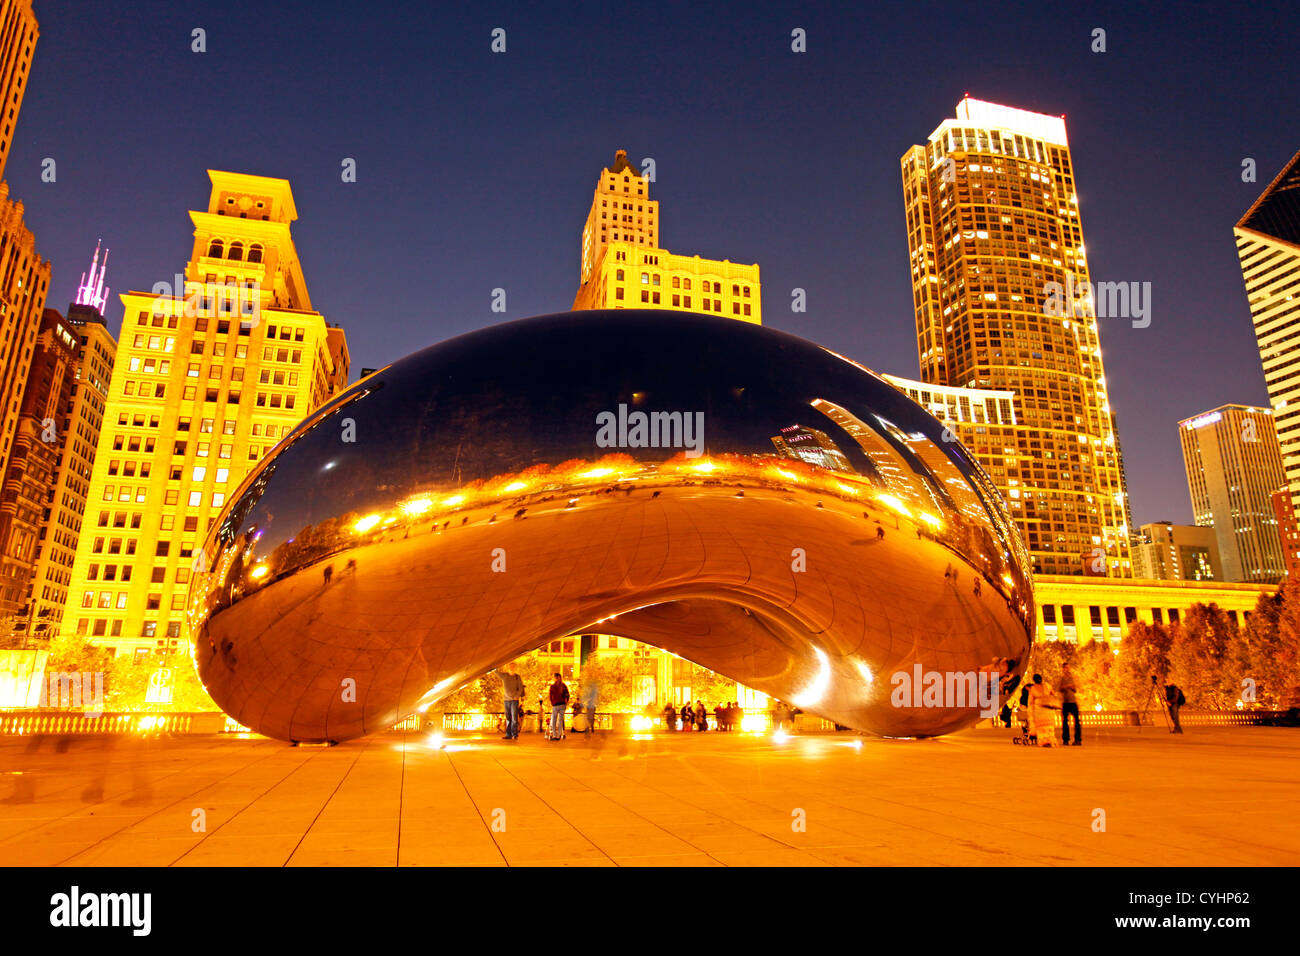 City skyline reflection in the Cloud Gate Sculpture (aka Coffee Bean) in Millennium Park, Chicago, Illinois, America Stock Photo